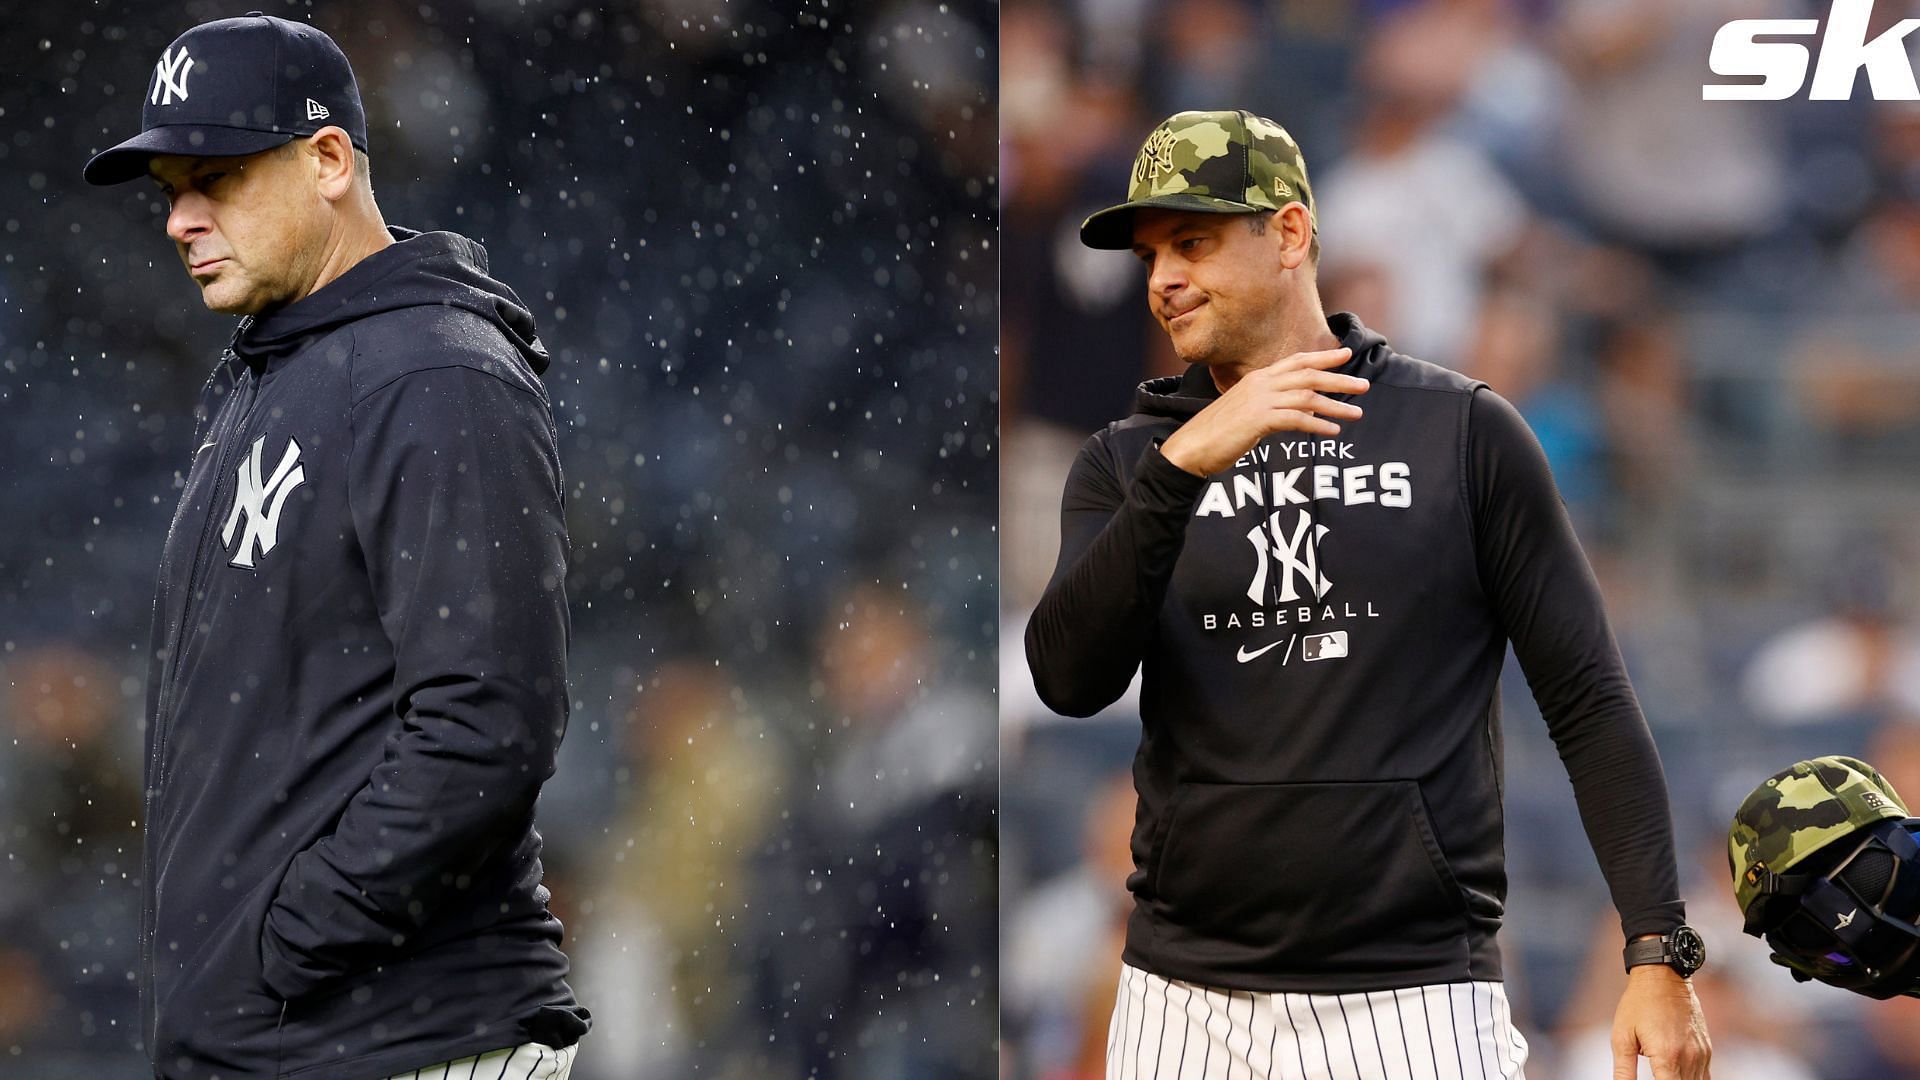 Yankees manager Aaron Boone has ticked off fans with recent comments